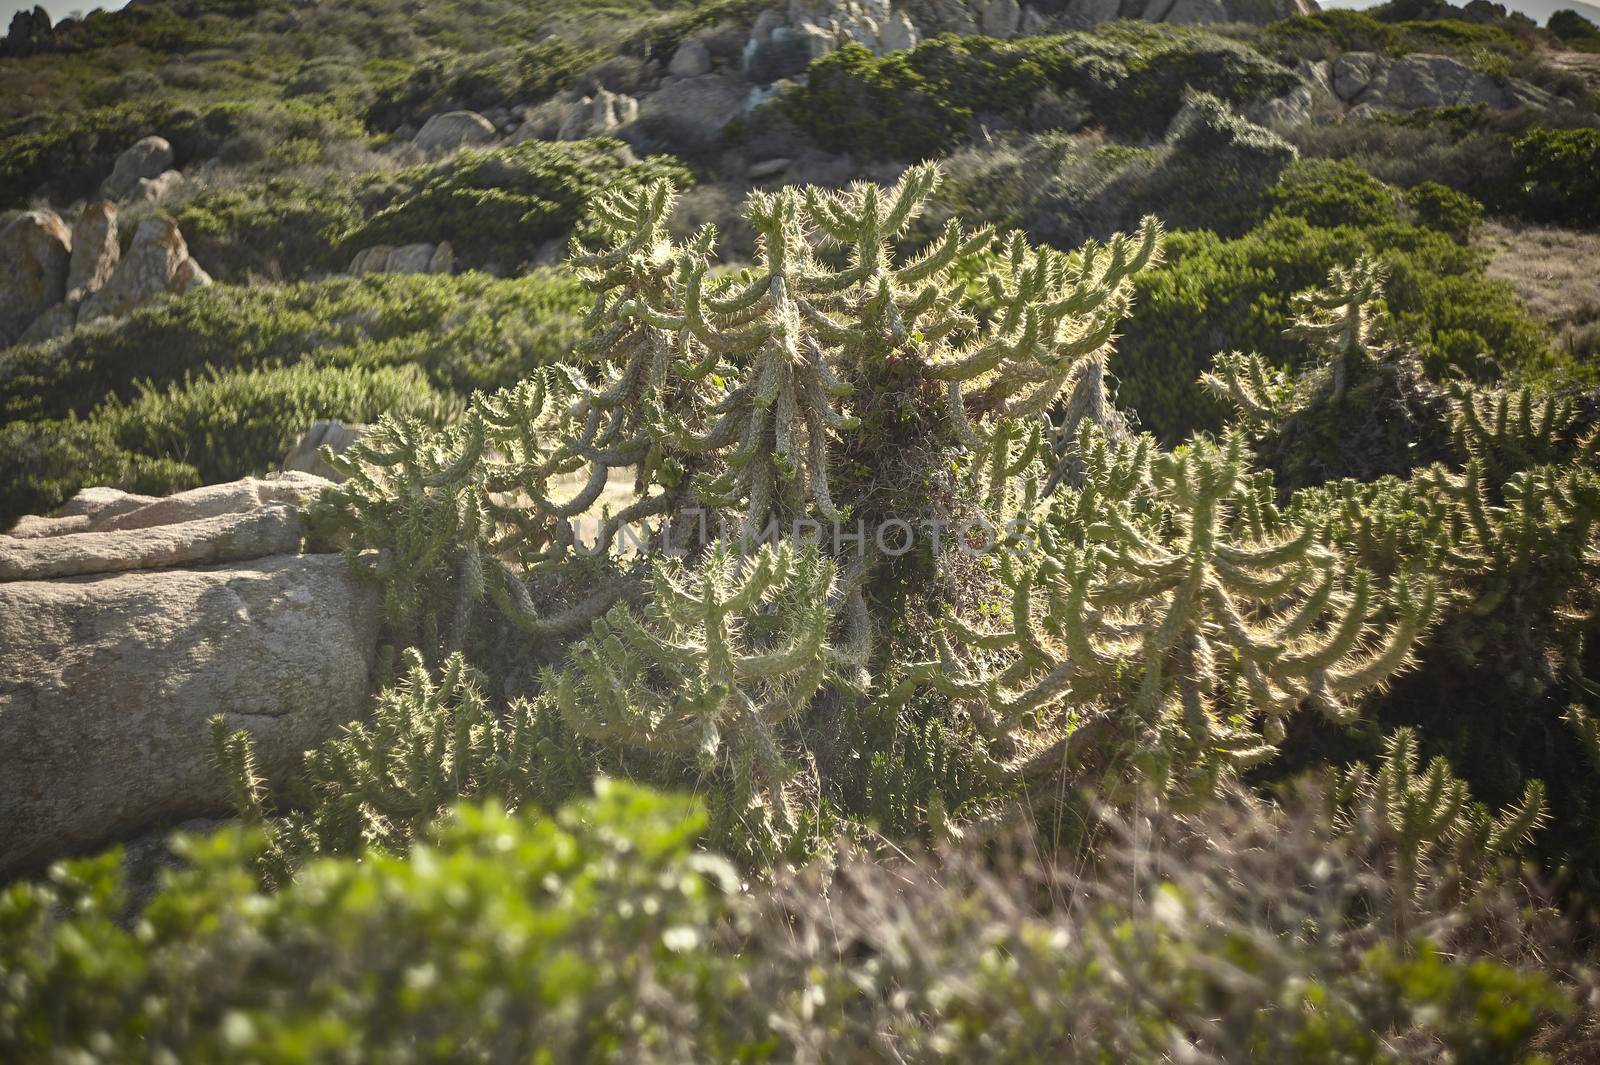 Mediterranean succulent plant typical of the southern coast of Sardinia.